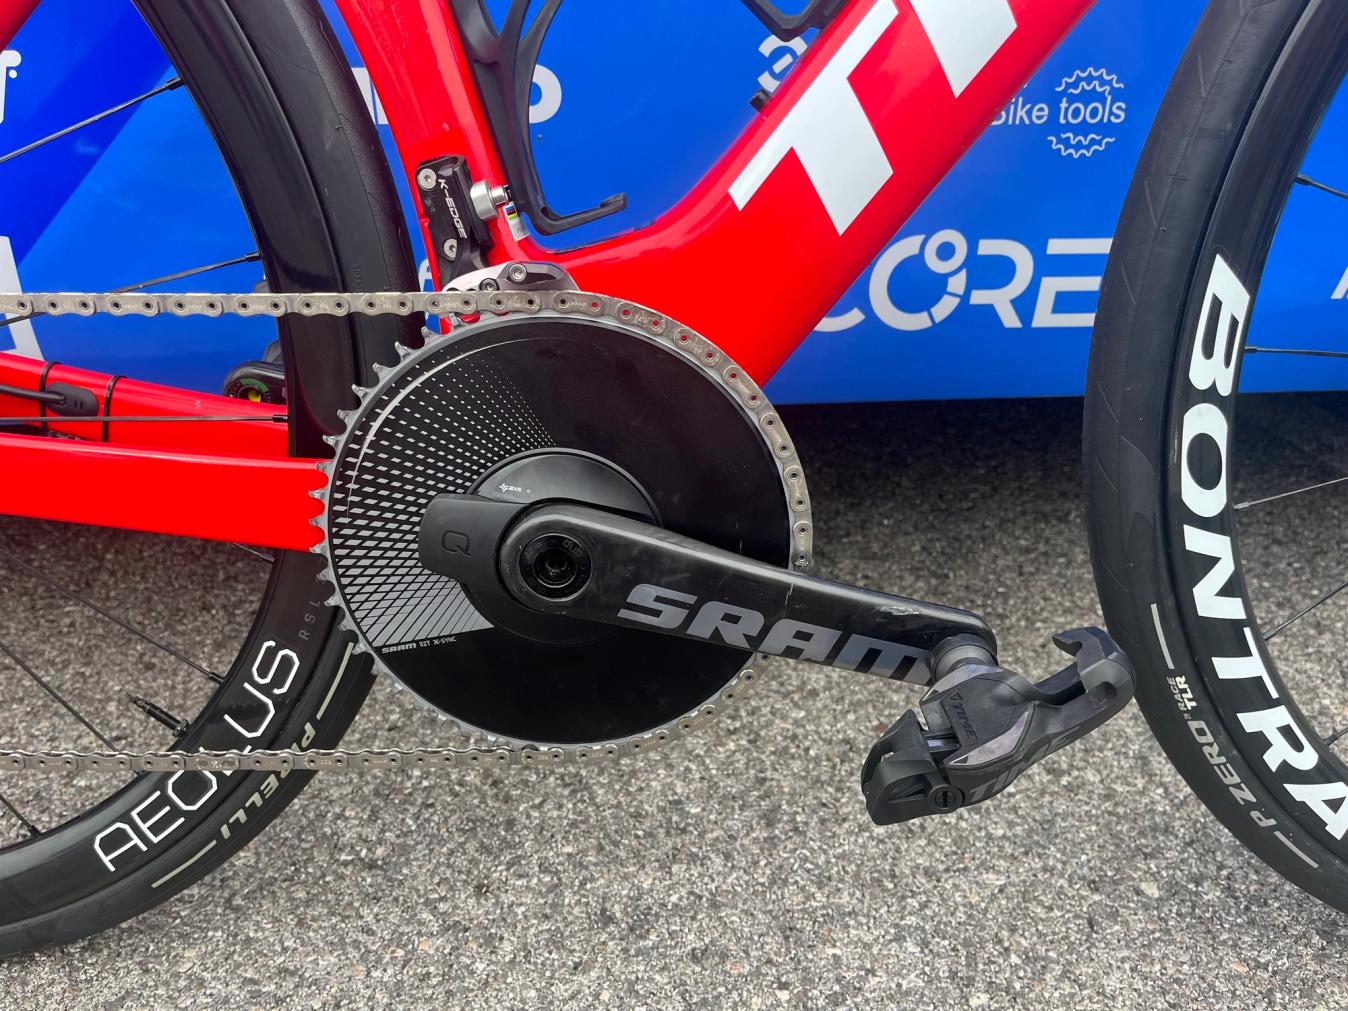 Jacopo Mosca had a wild 52-tooth chainring for the Serenissima Gravel race